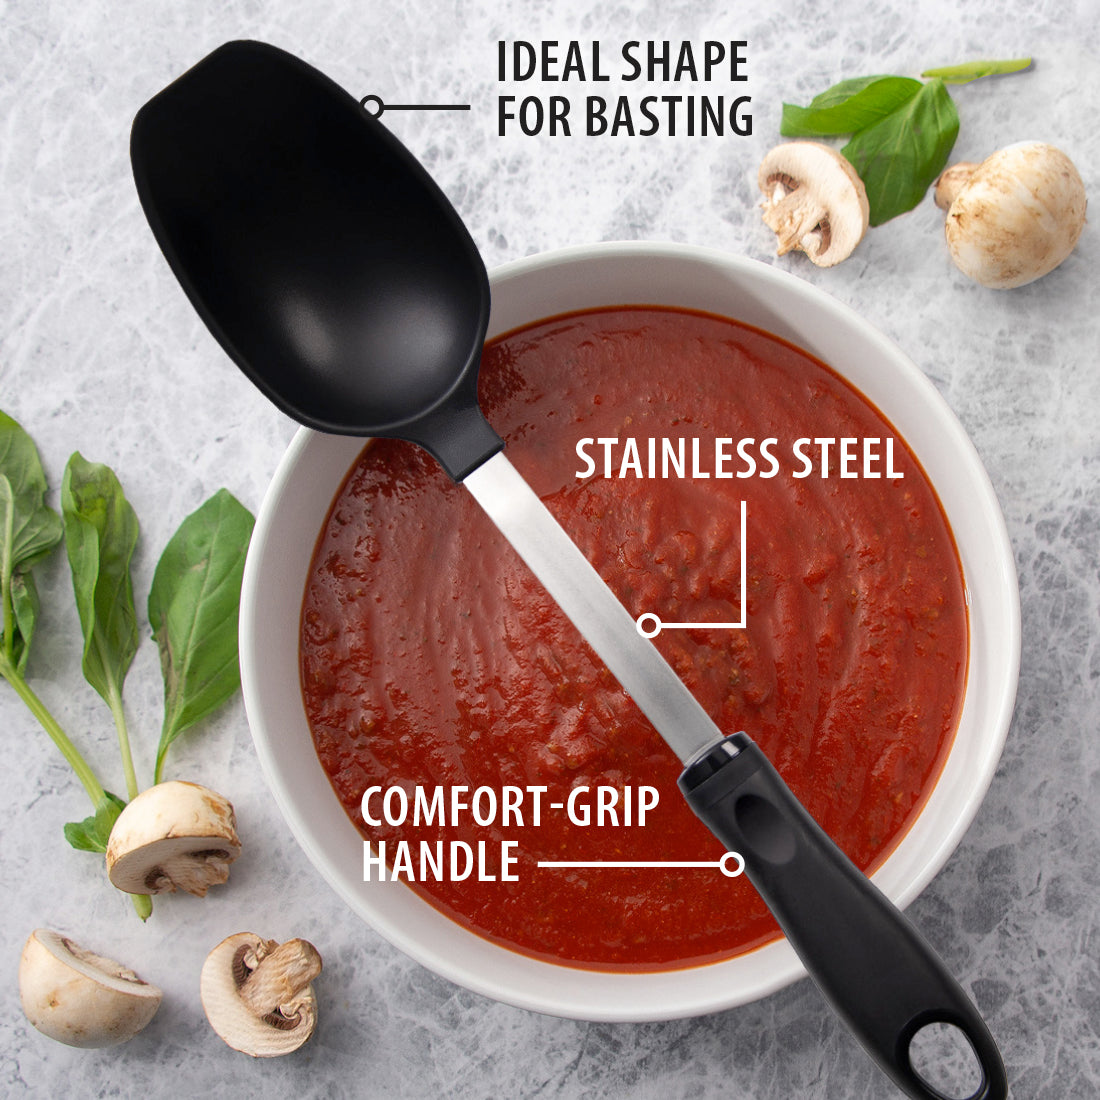 Rada Cutlery Basting Spoon laying over a bowl with red sauce, and mushrooms and garnishes surrounding it.